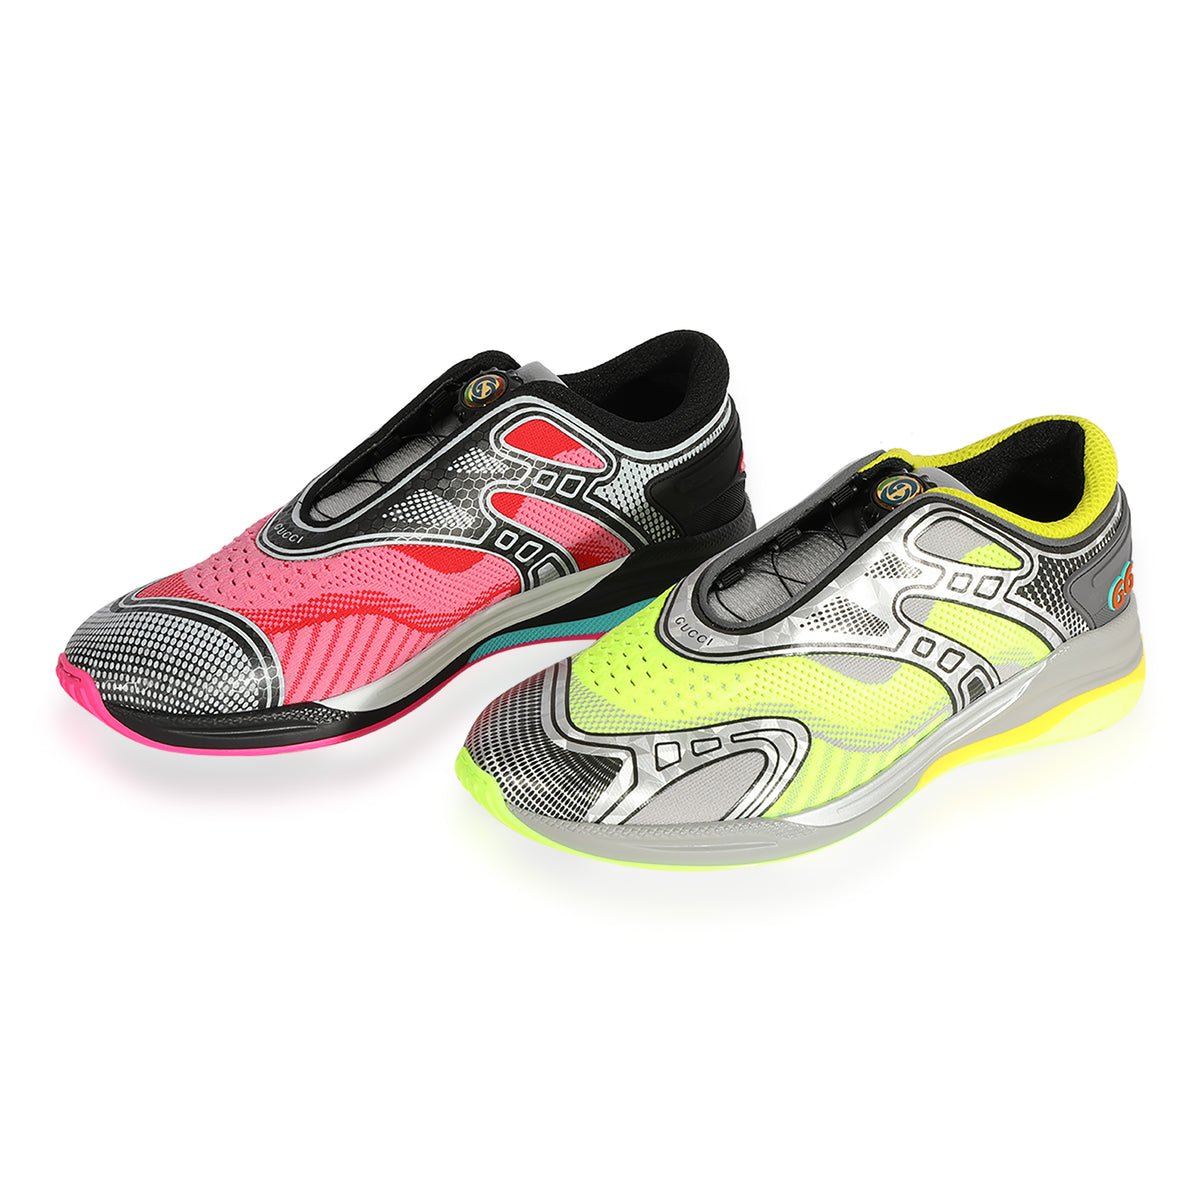 Ultrapace R 'Mismatched - Neon Pink Yellow'